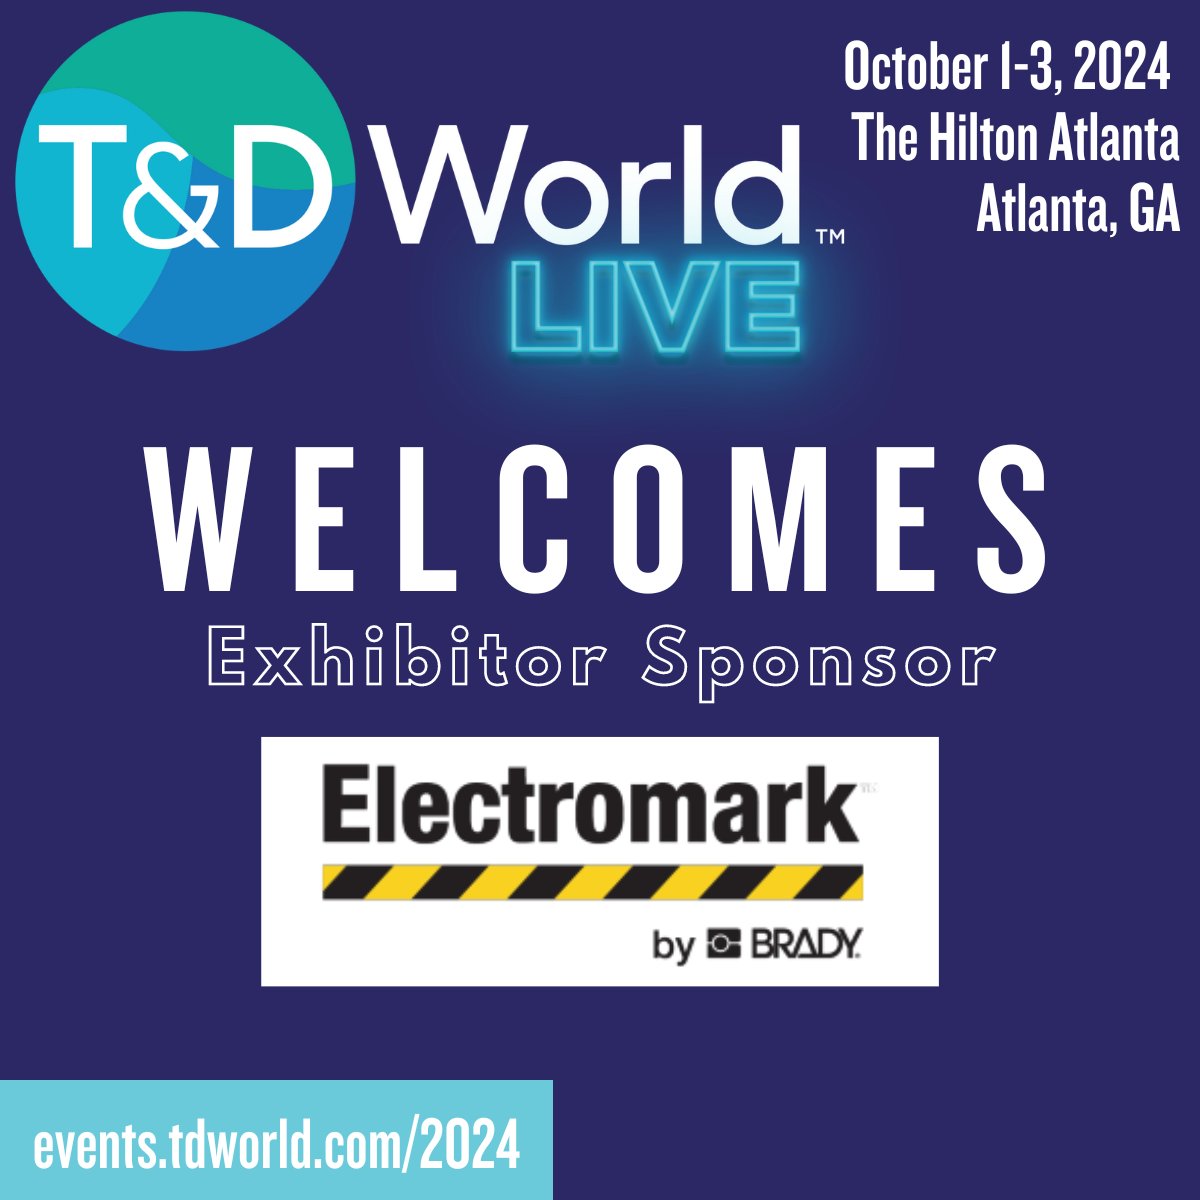 T&D World Live 2024 welcomes exhibitor sponsor: Electromark Make an impact in the transformation of transmission and distribution grids - don't miss this chance to connect and engage with the T&D World audience! Secure your sponsorship early to maximize brand awareness!